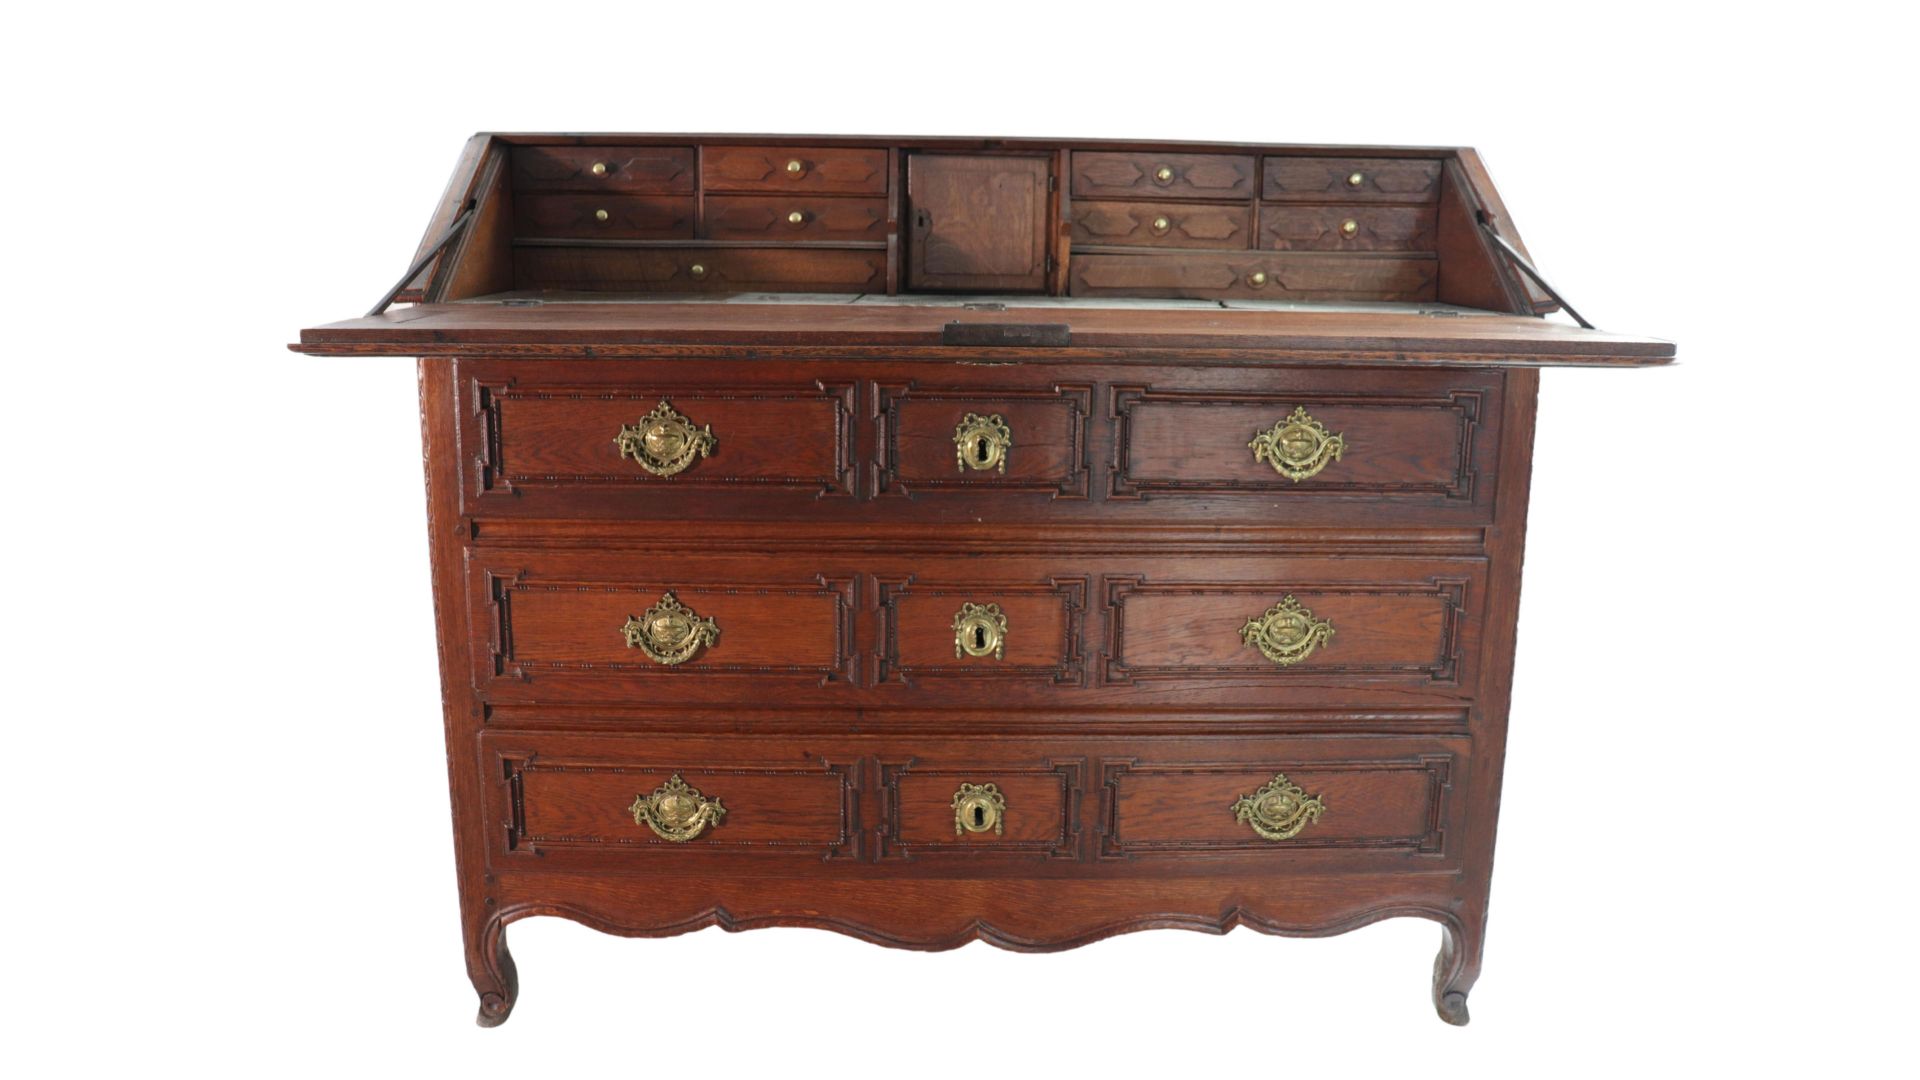 18th century scriban cabinet - Image 2 of 4